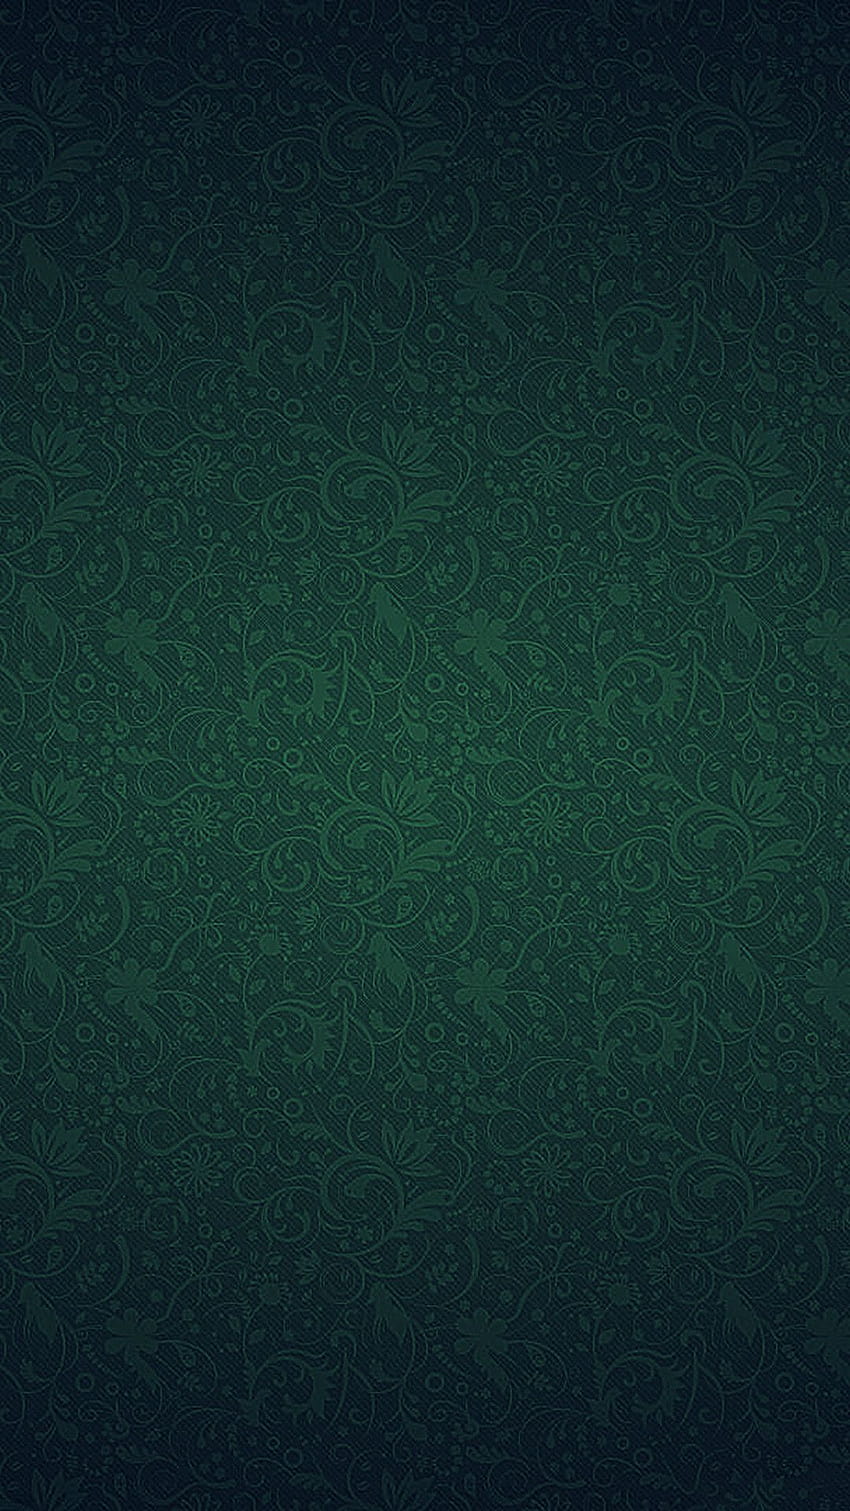 1080x1920 Green Ornament Texture Pattern, amoled android green HD phone wallpaper